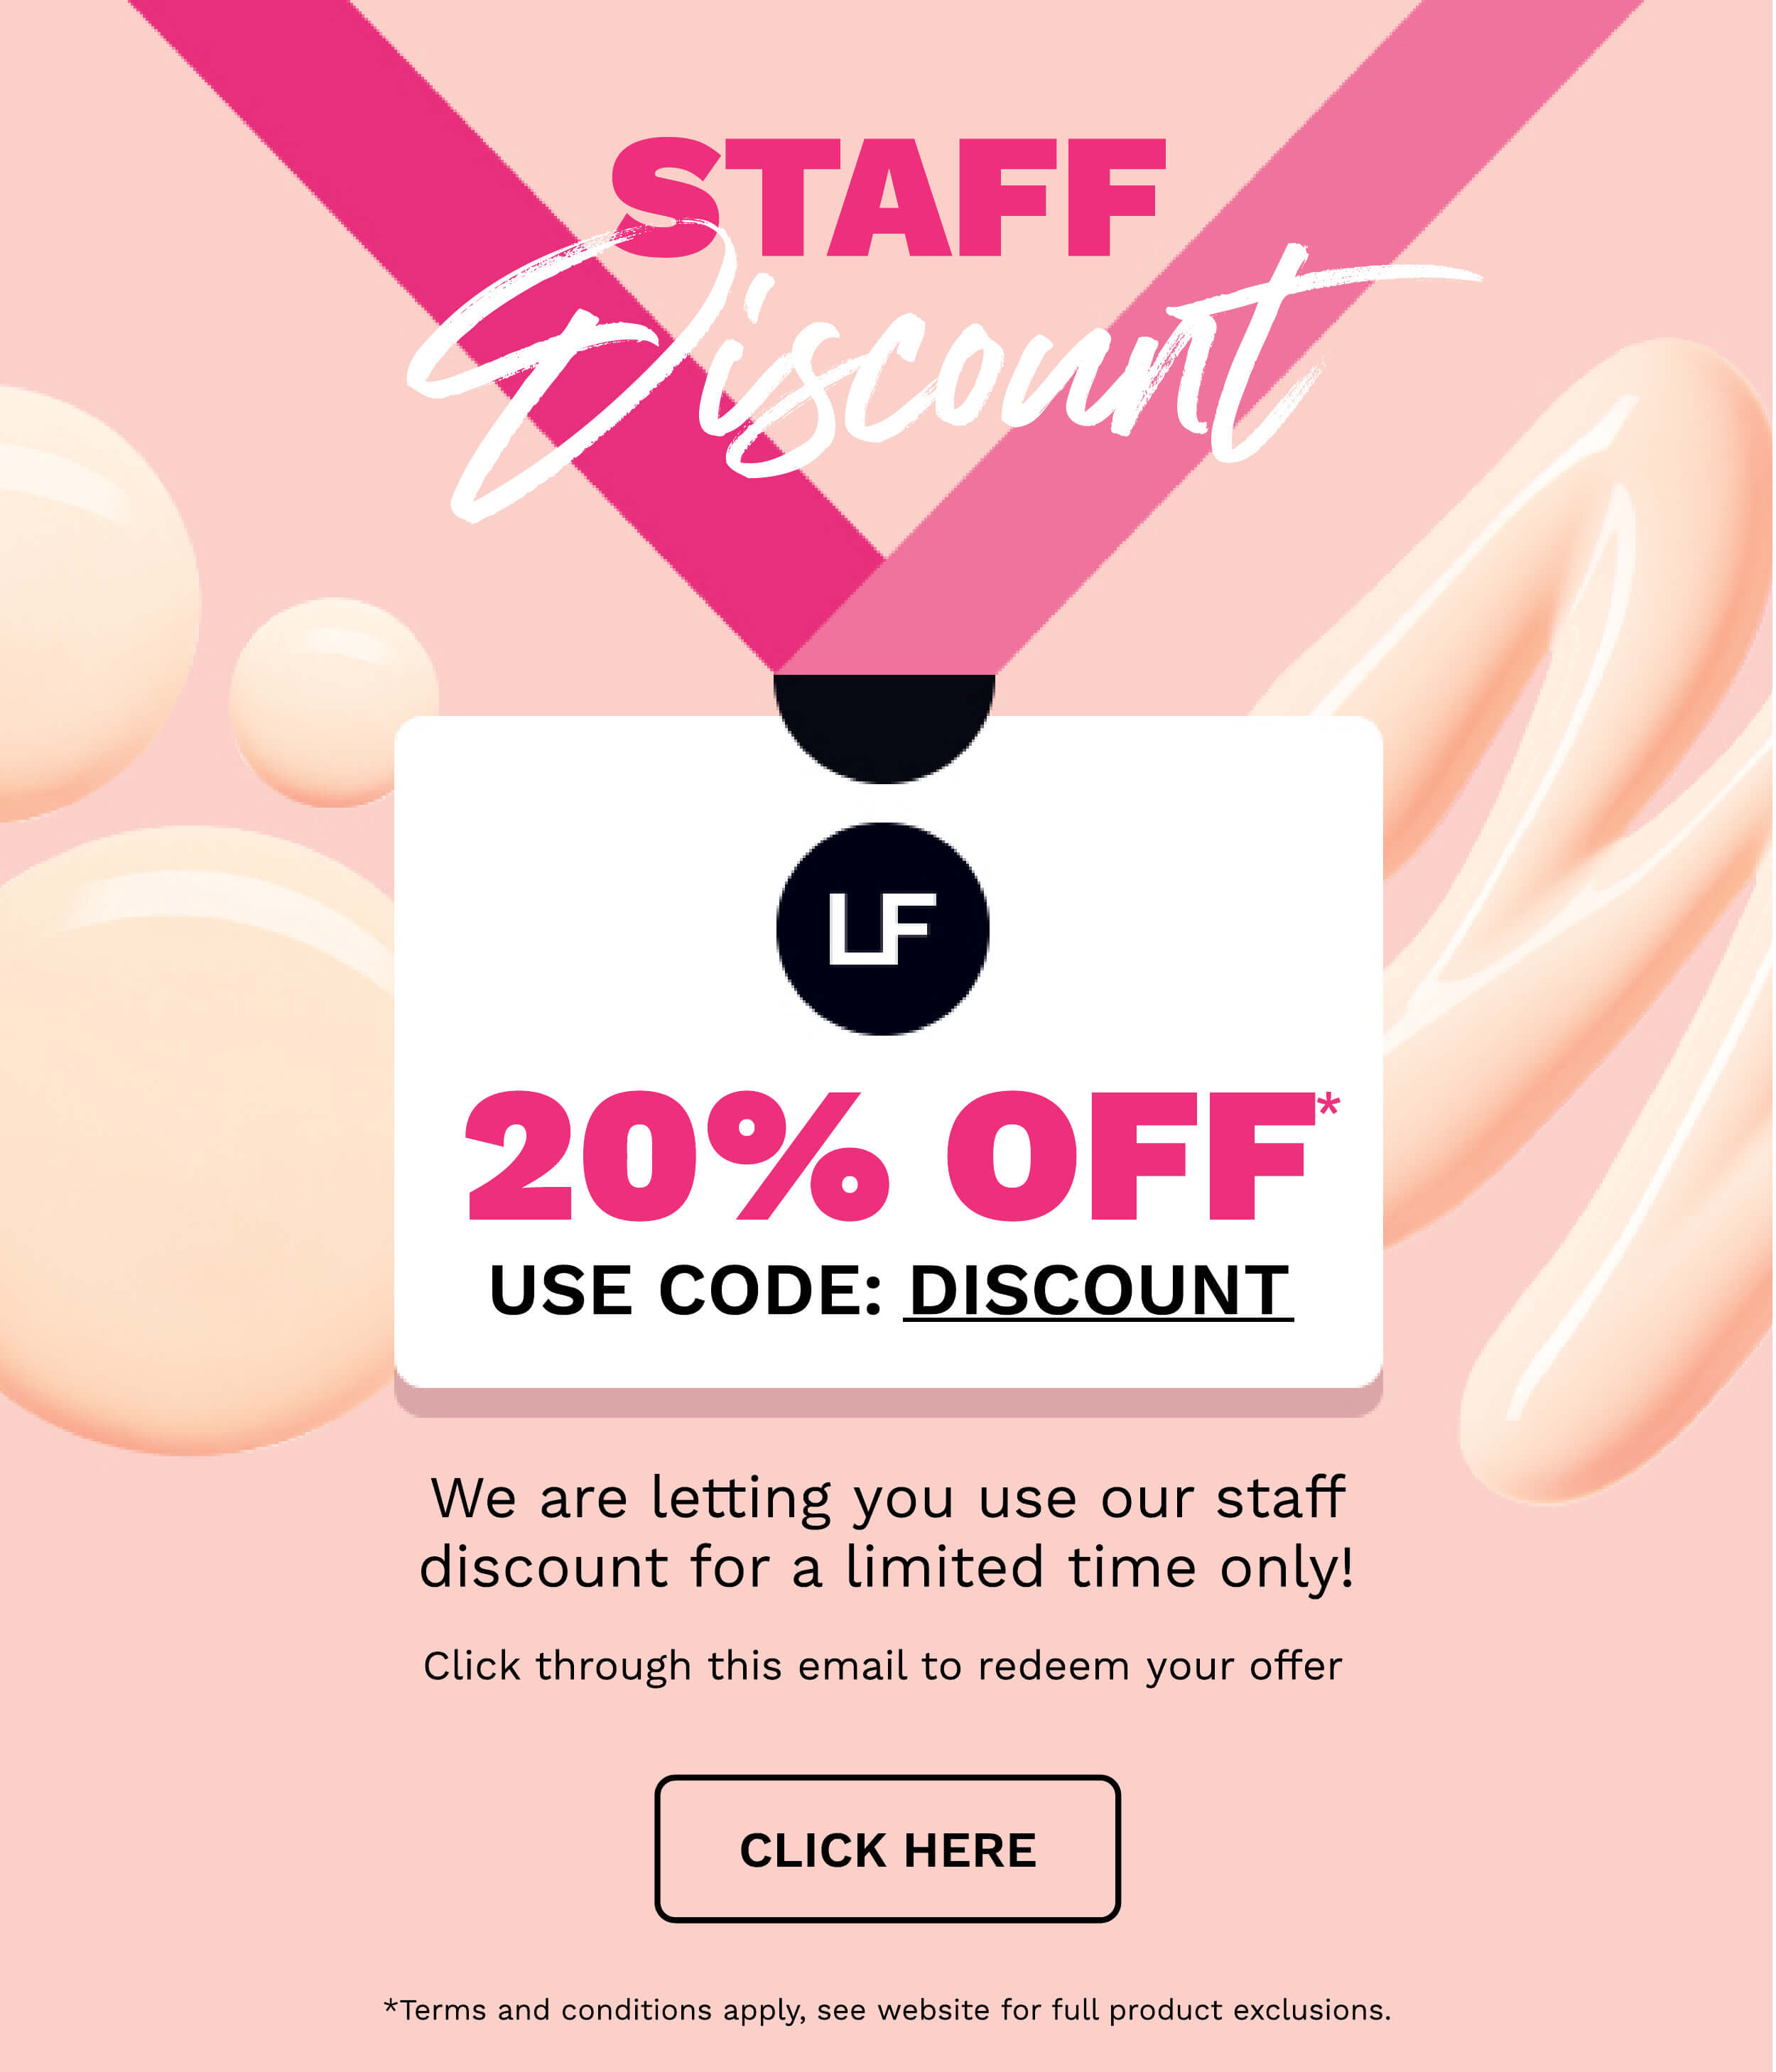 Borrow our staff discount for a limited time only use code DISCOUNT